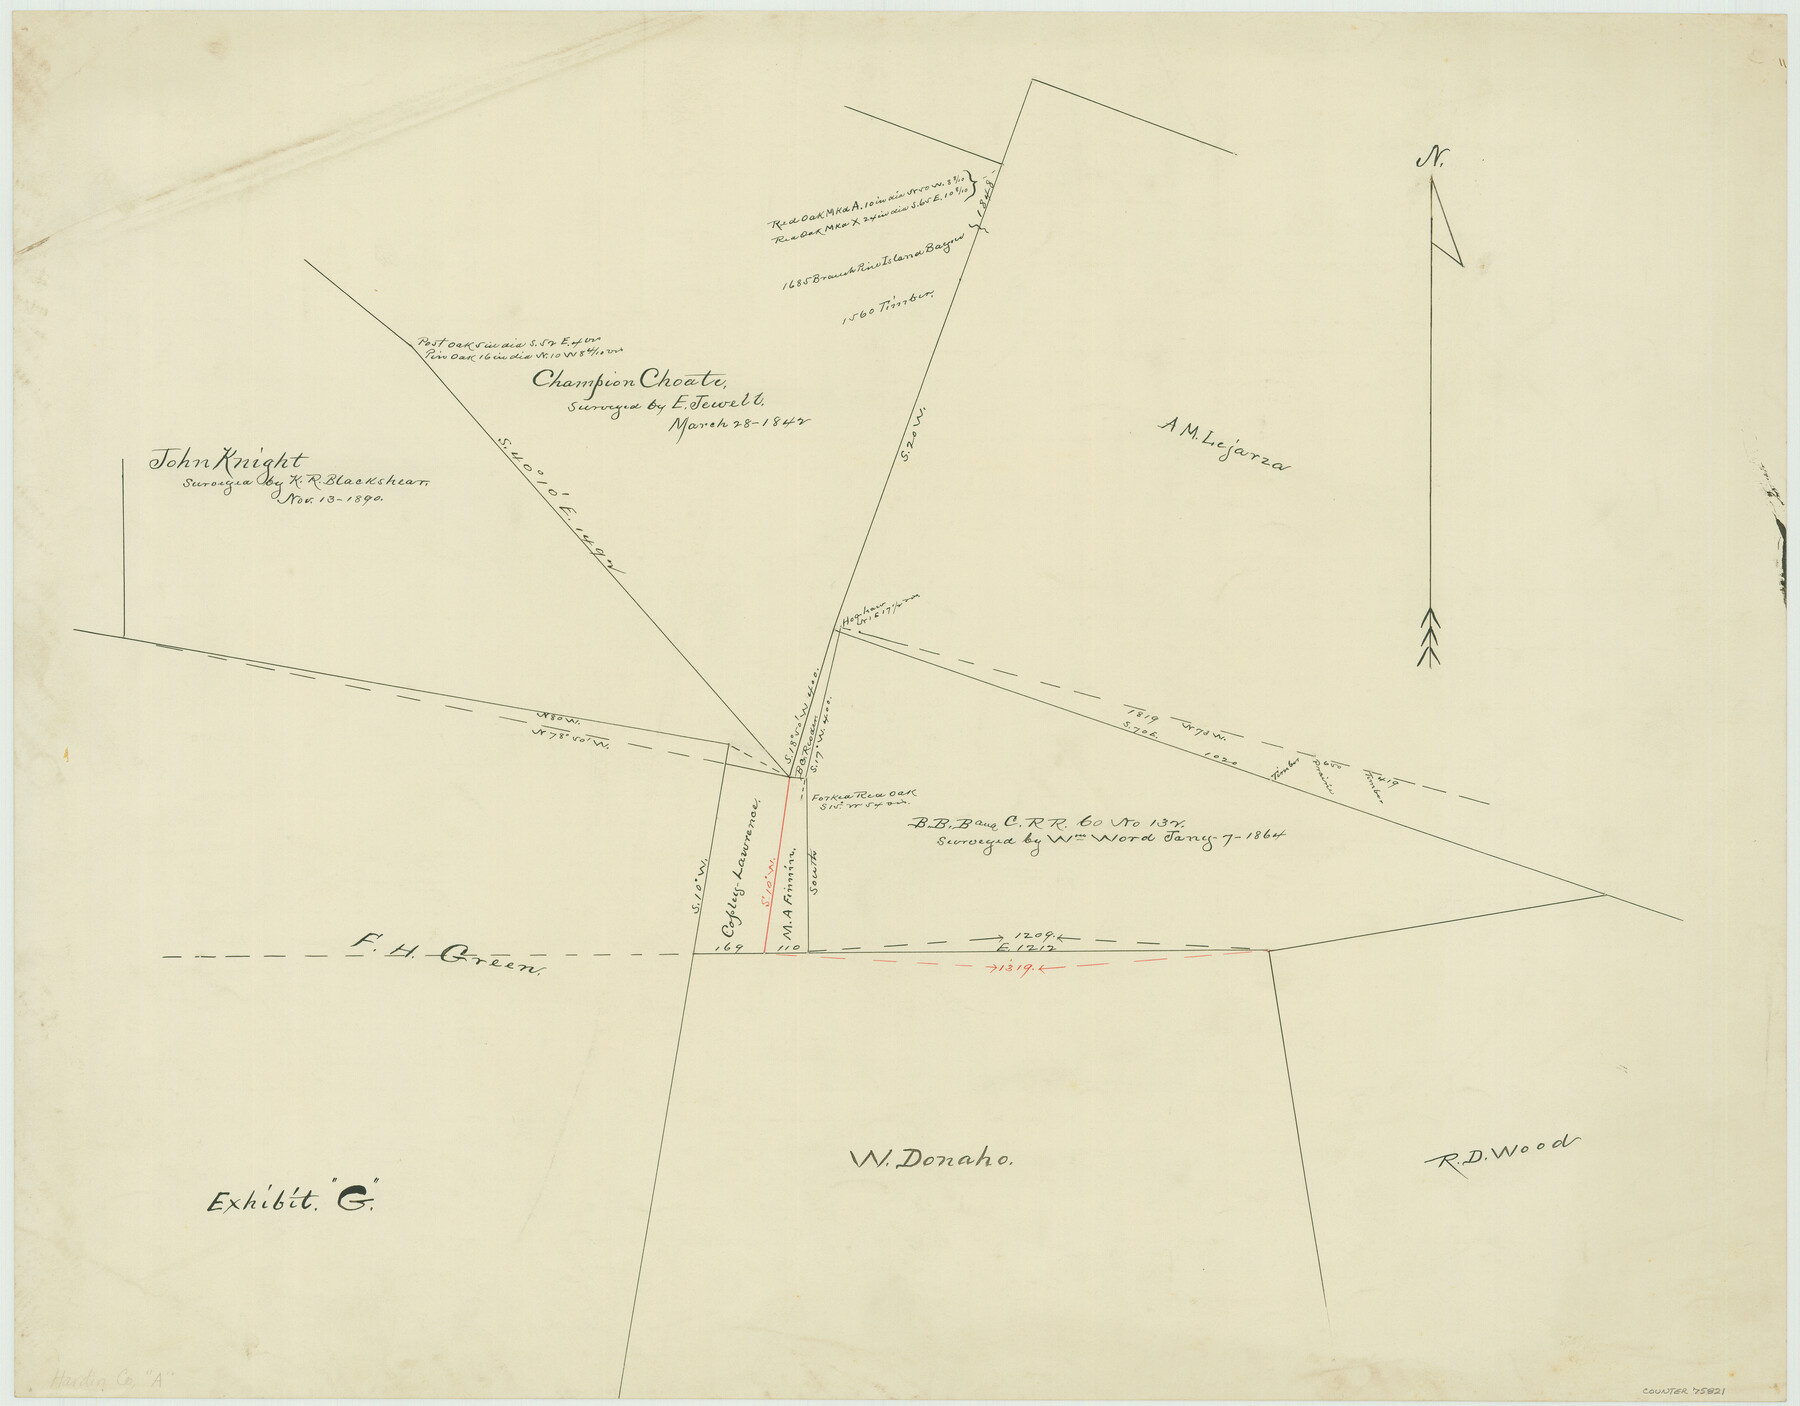 75821, [Surveying Sketch of John Knight, Champion Choate, A. M. Lejarza, et al in Hardin County, Texas - Exhibit "G"], Maddox Collection